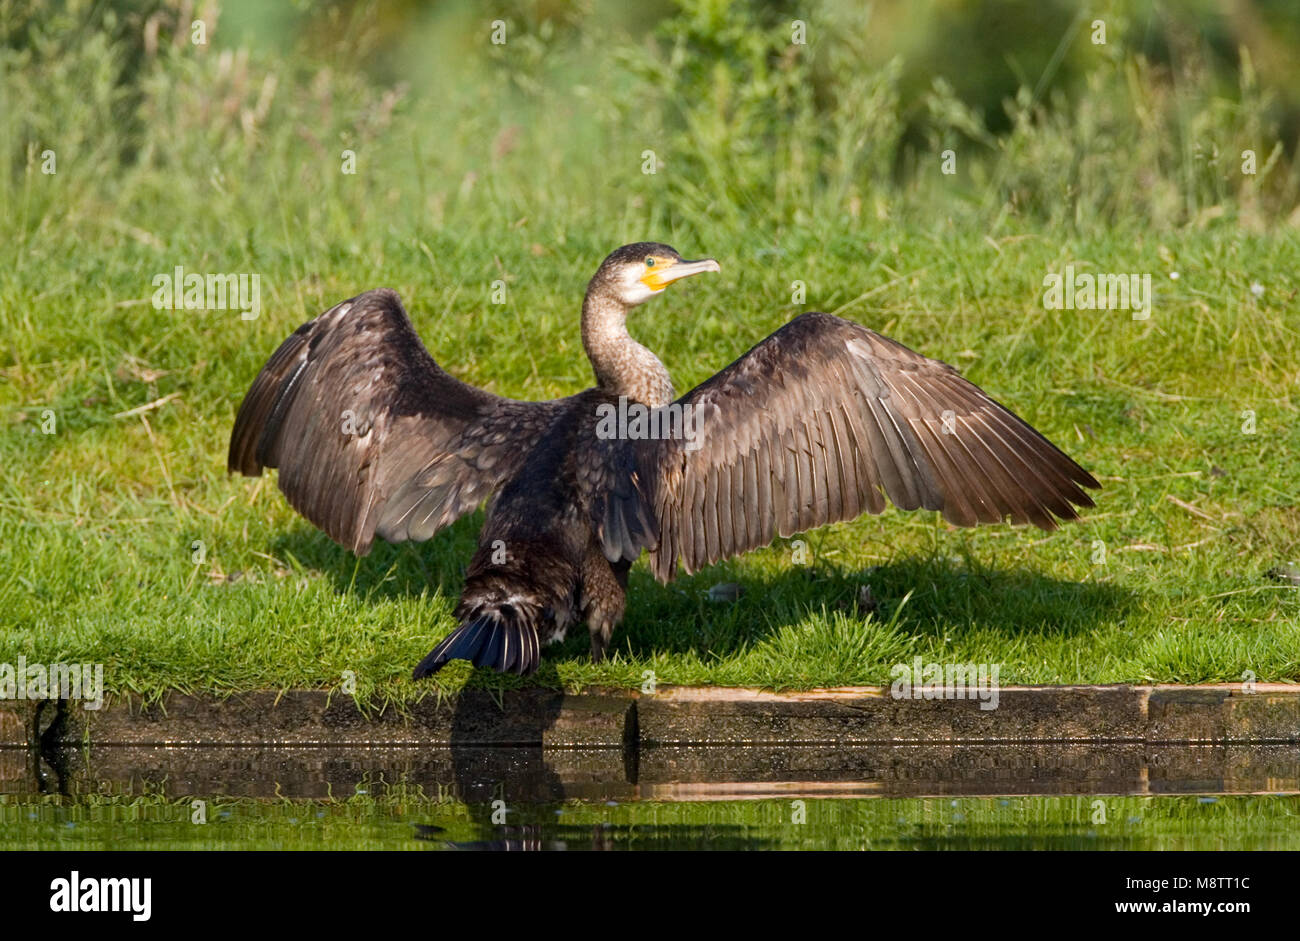 Onvolwassen Aalscholver droogt vleugels; Immature Great Cormorant drying wings Stock Photo